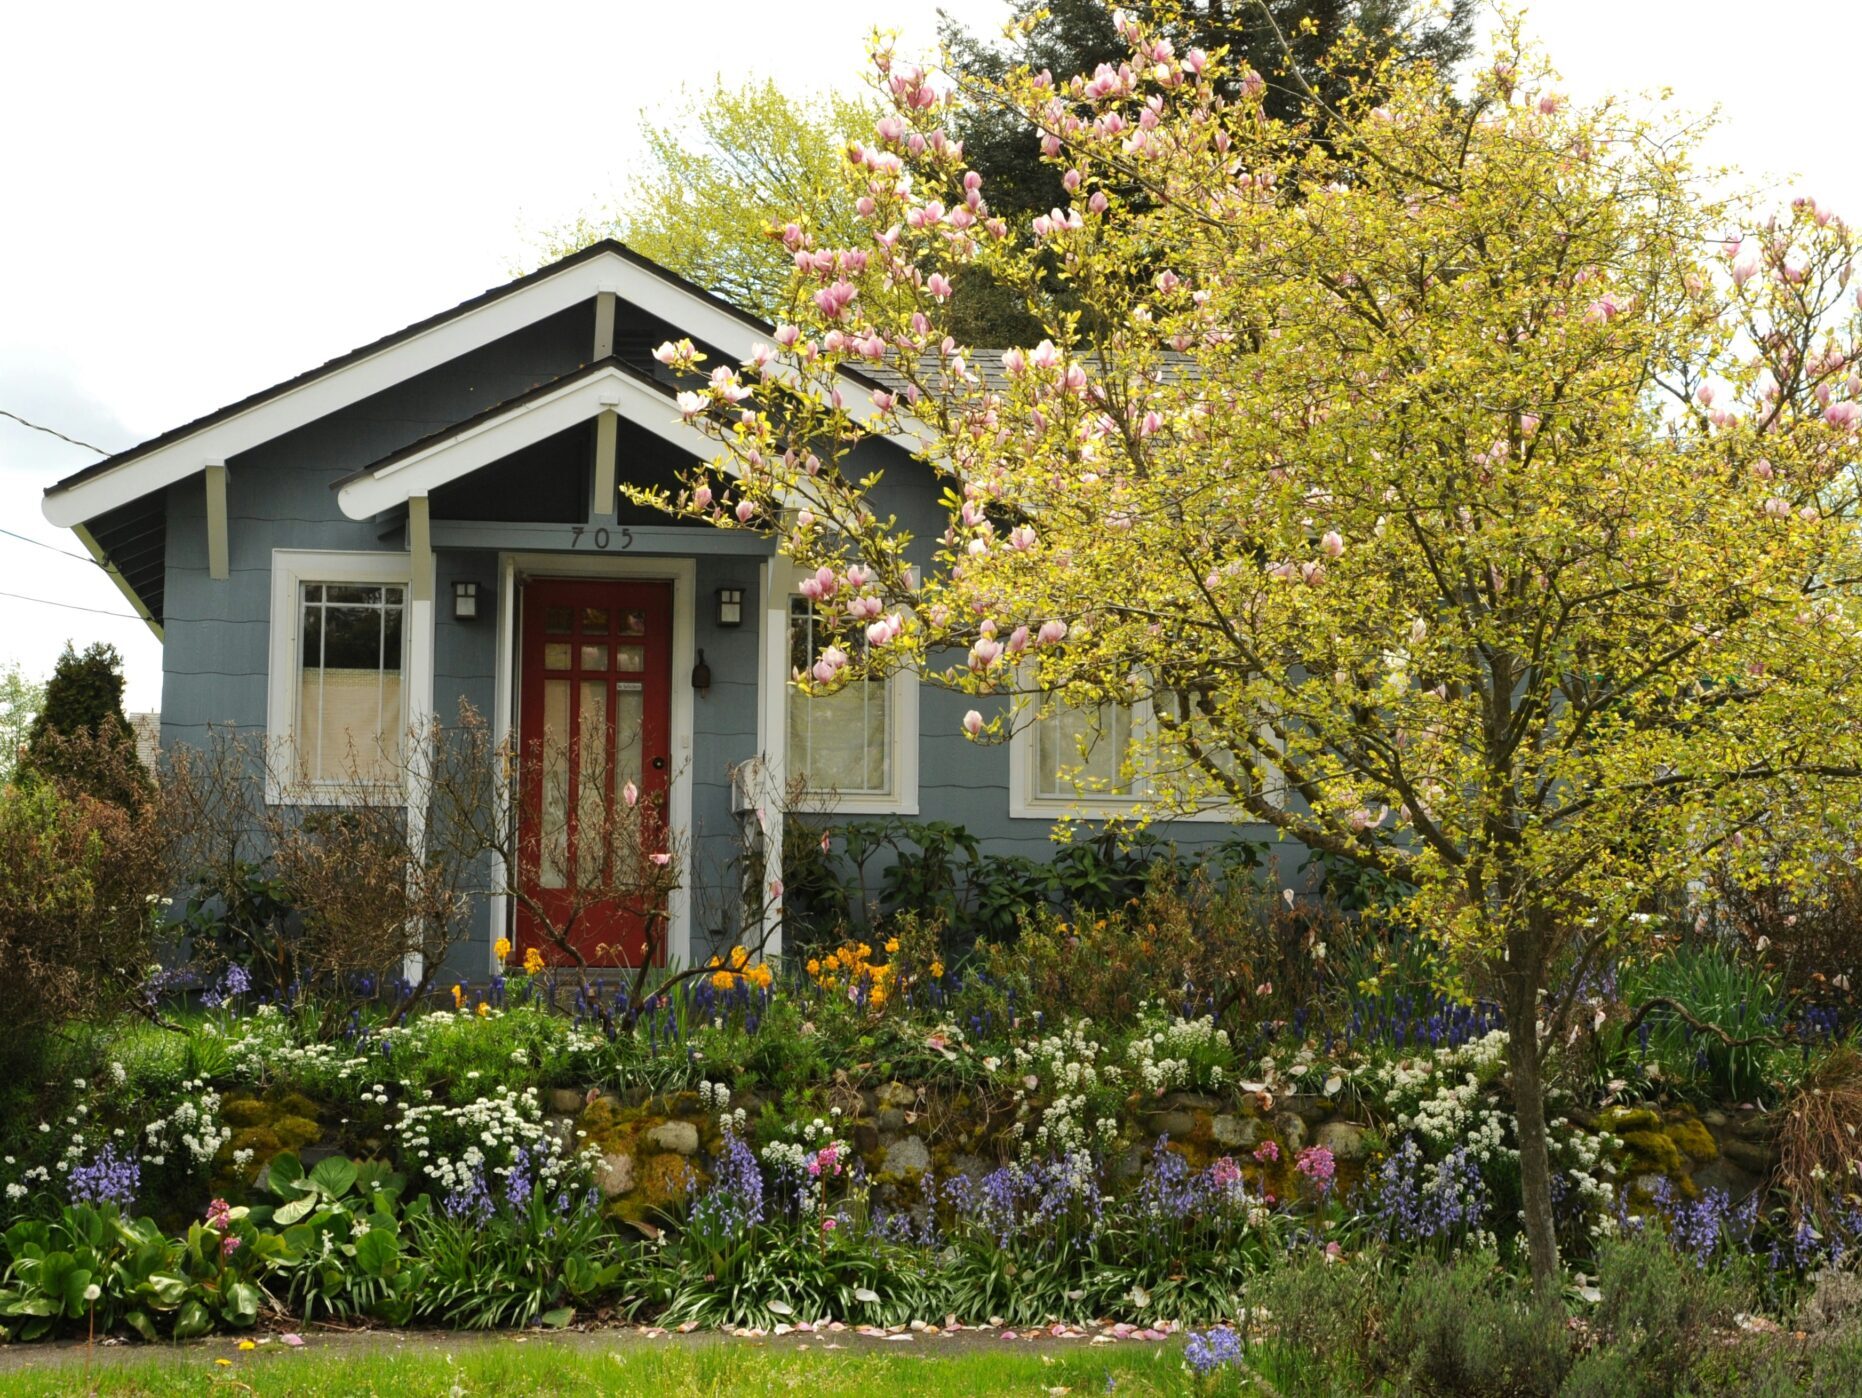 Exterior of residential home, painted gray with white trim with flowers and tree in foreground